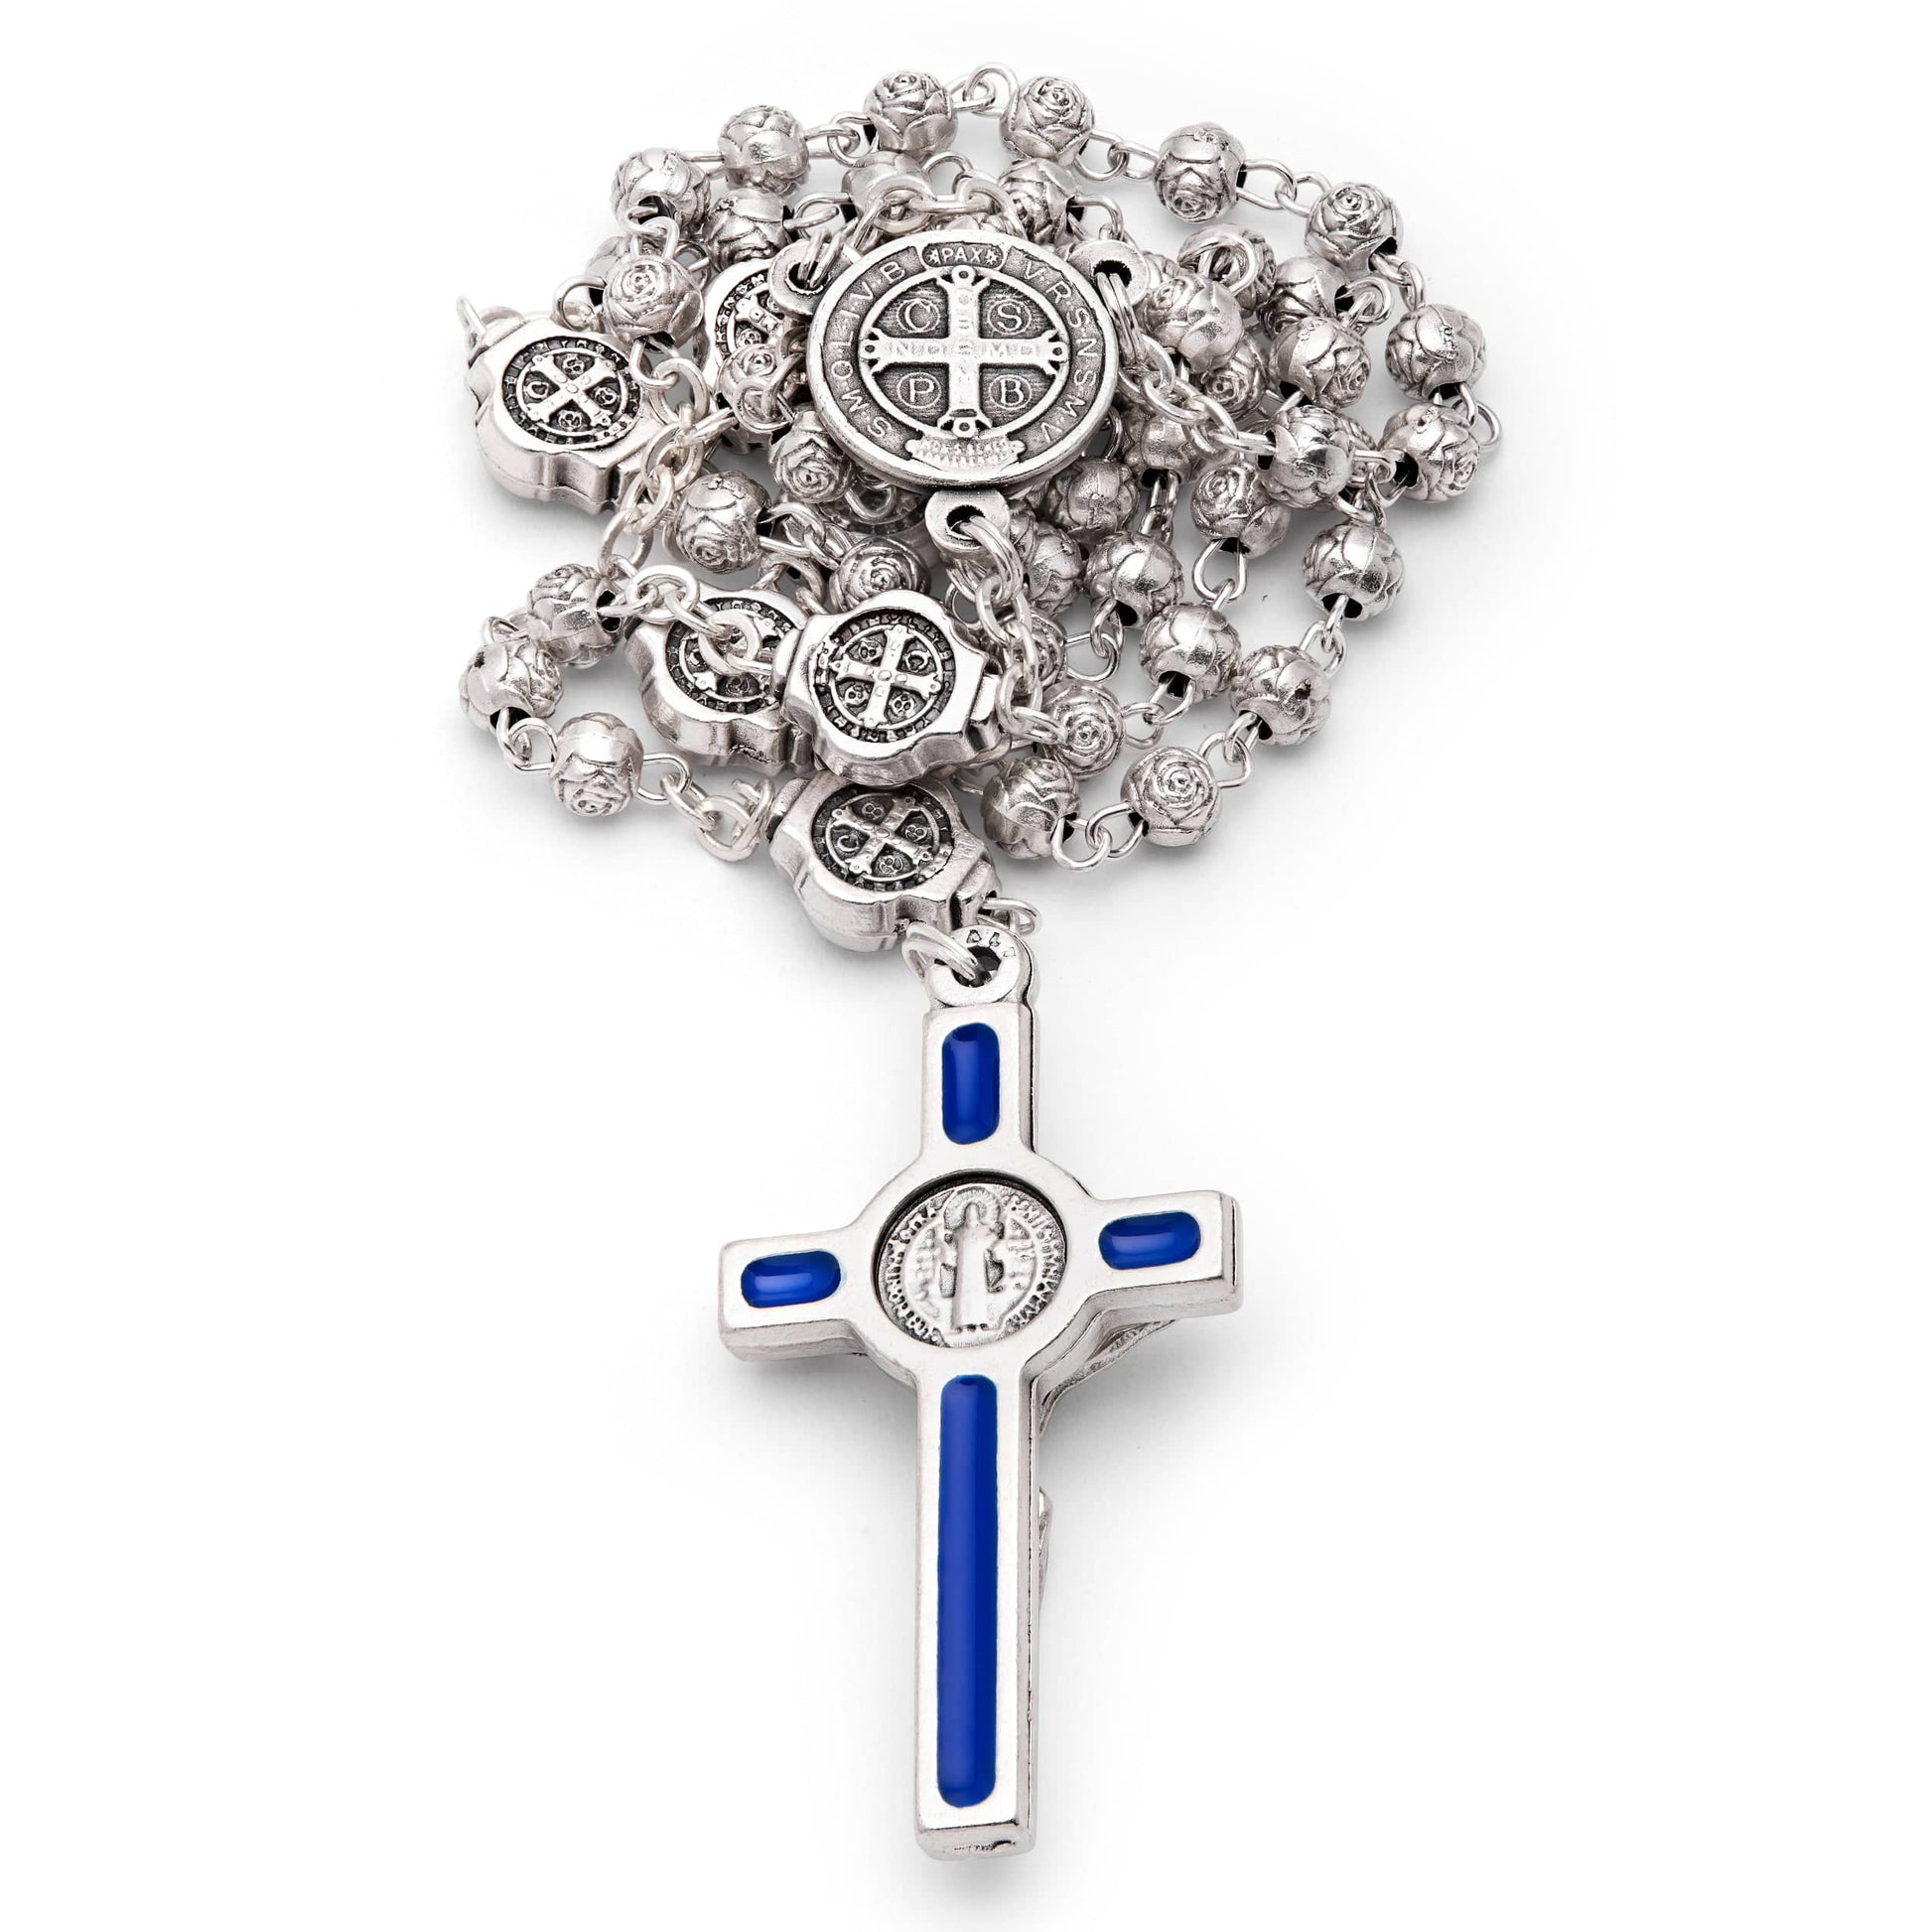 MONDO CATTOLICO Prayer Beads 36 cm (14.17 in) / 4 mm (0.15 in) Case with the Rosary of Saint Benedict